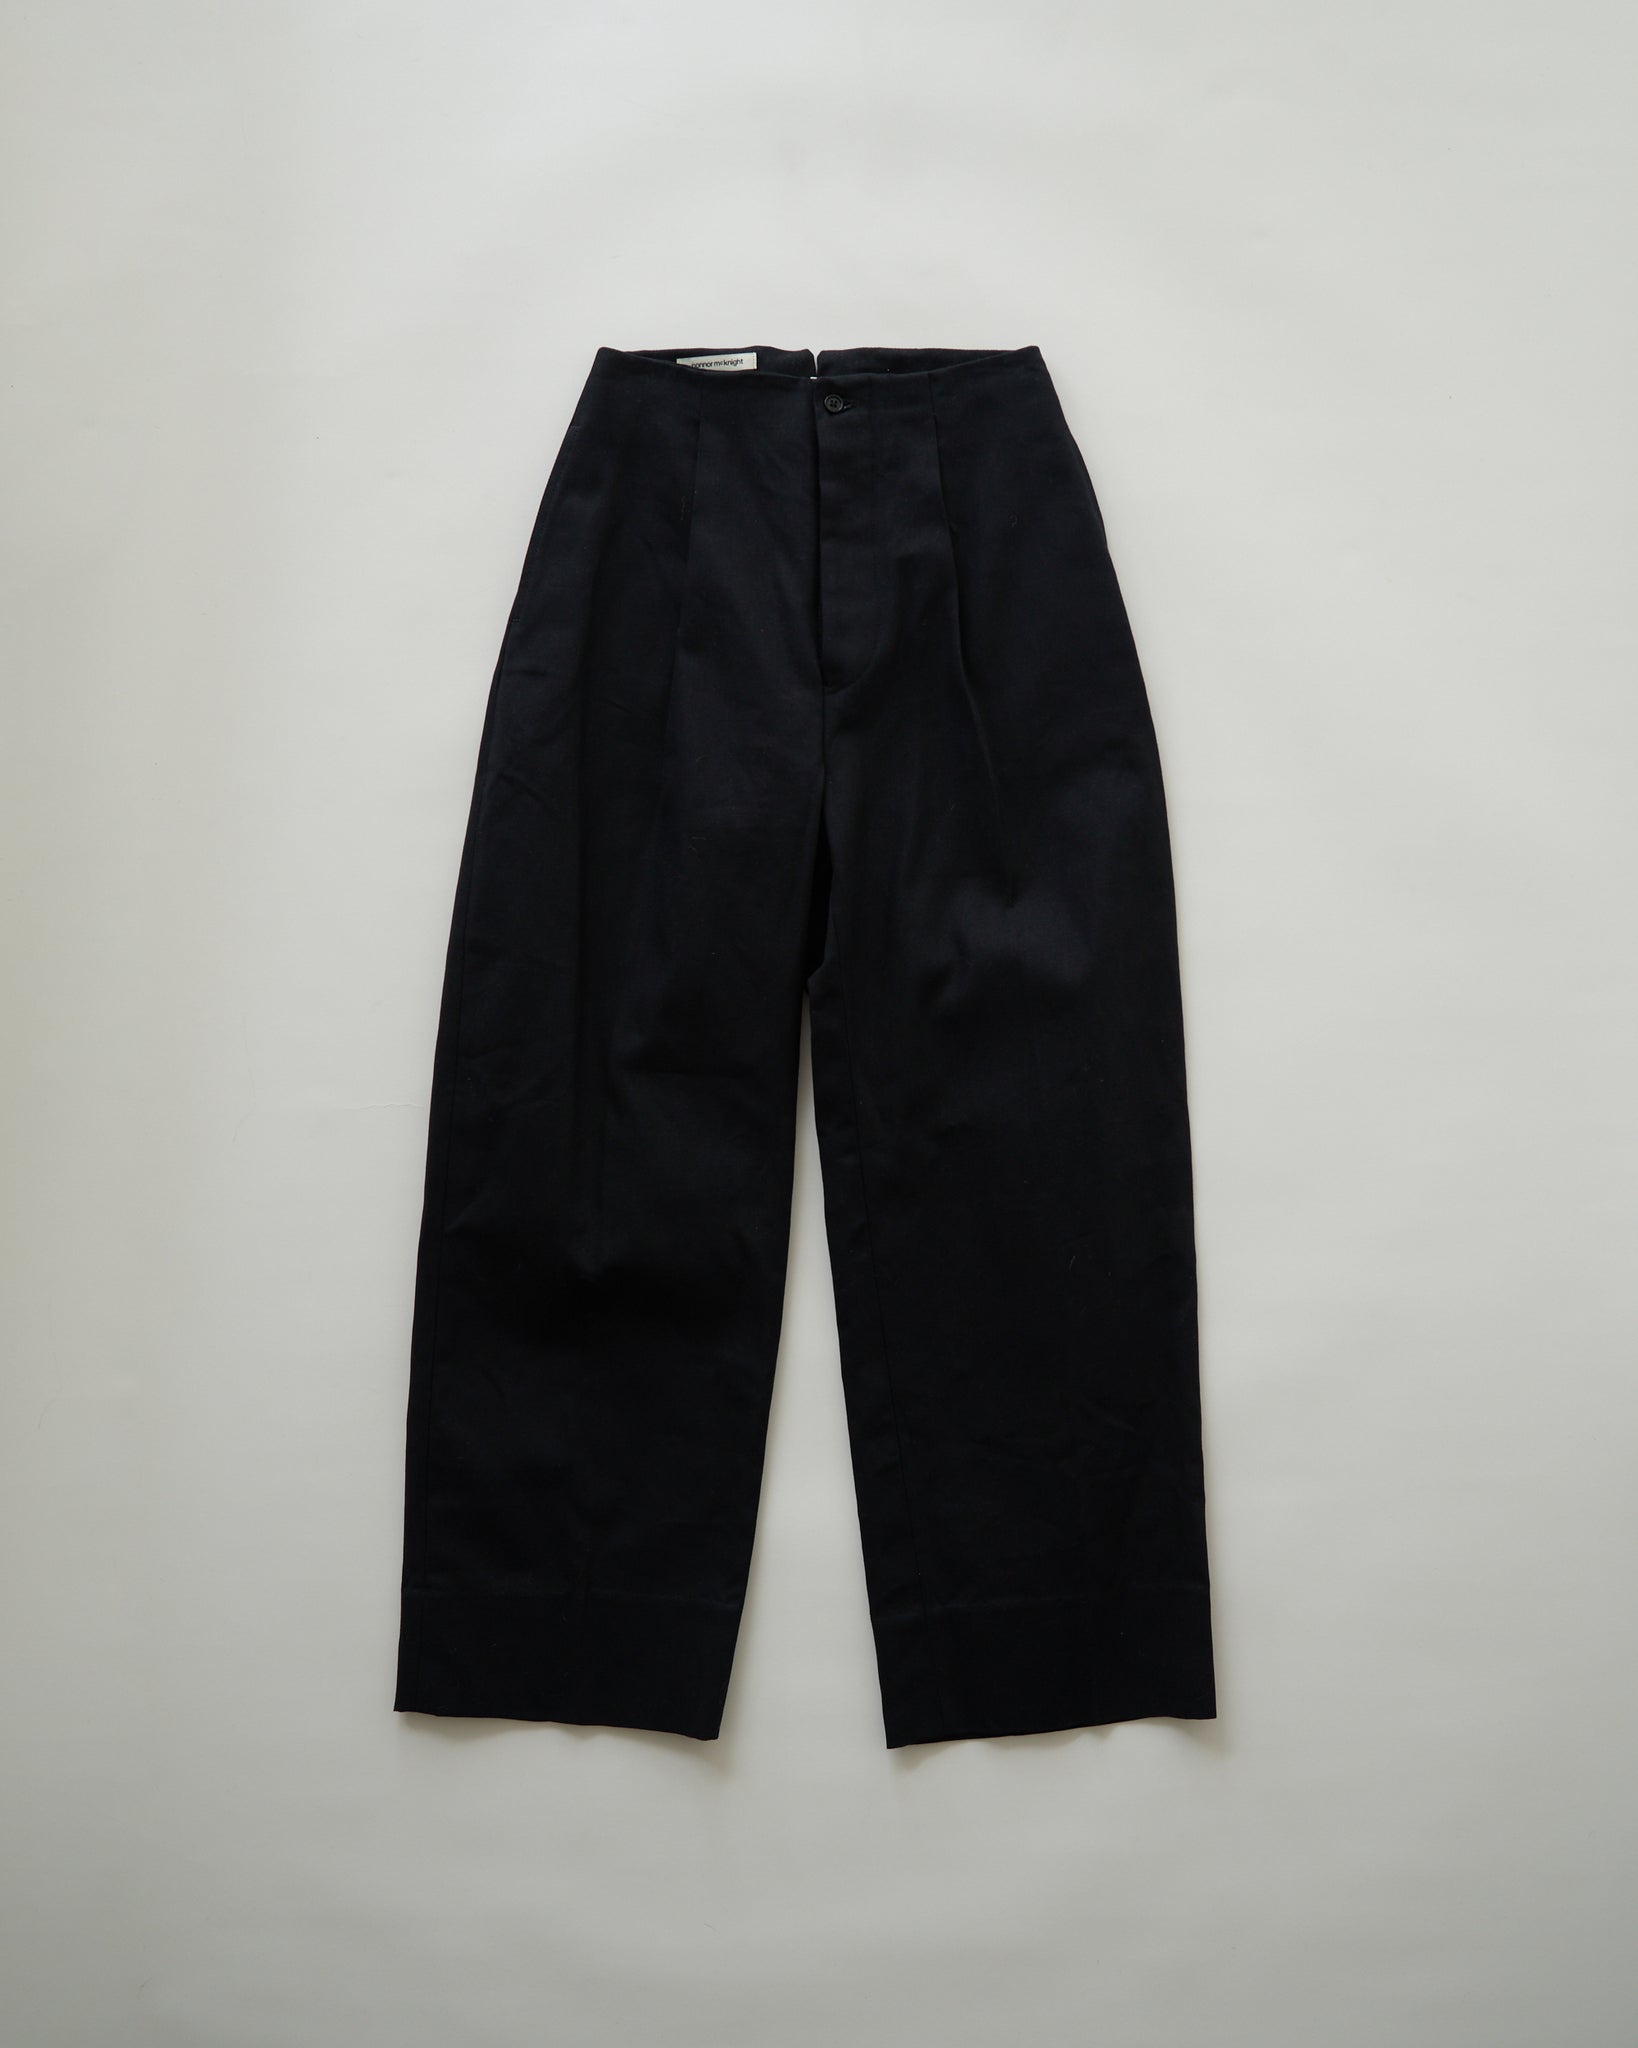 a suiting trouser - black